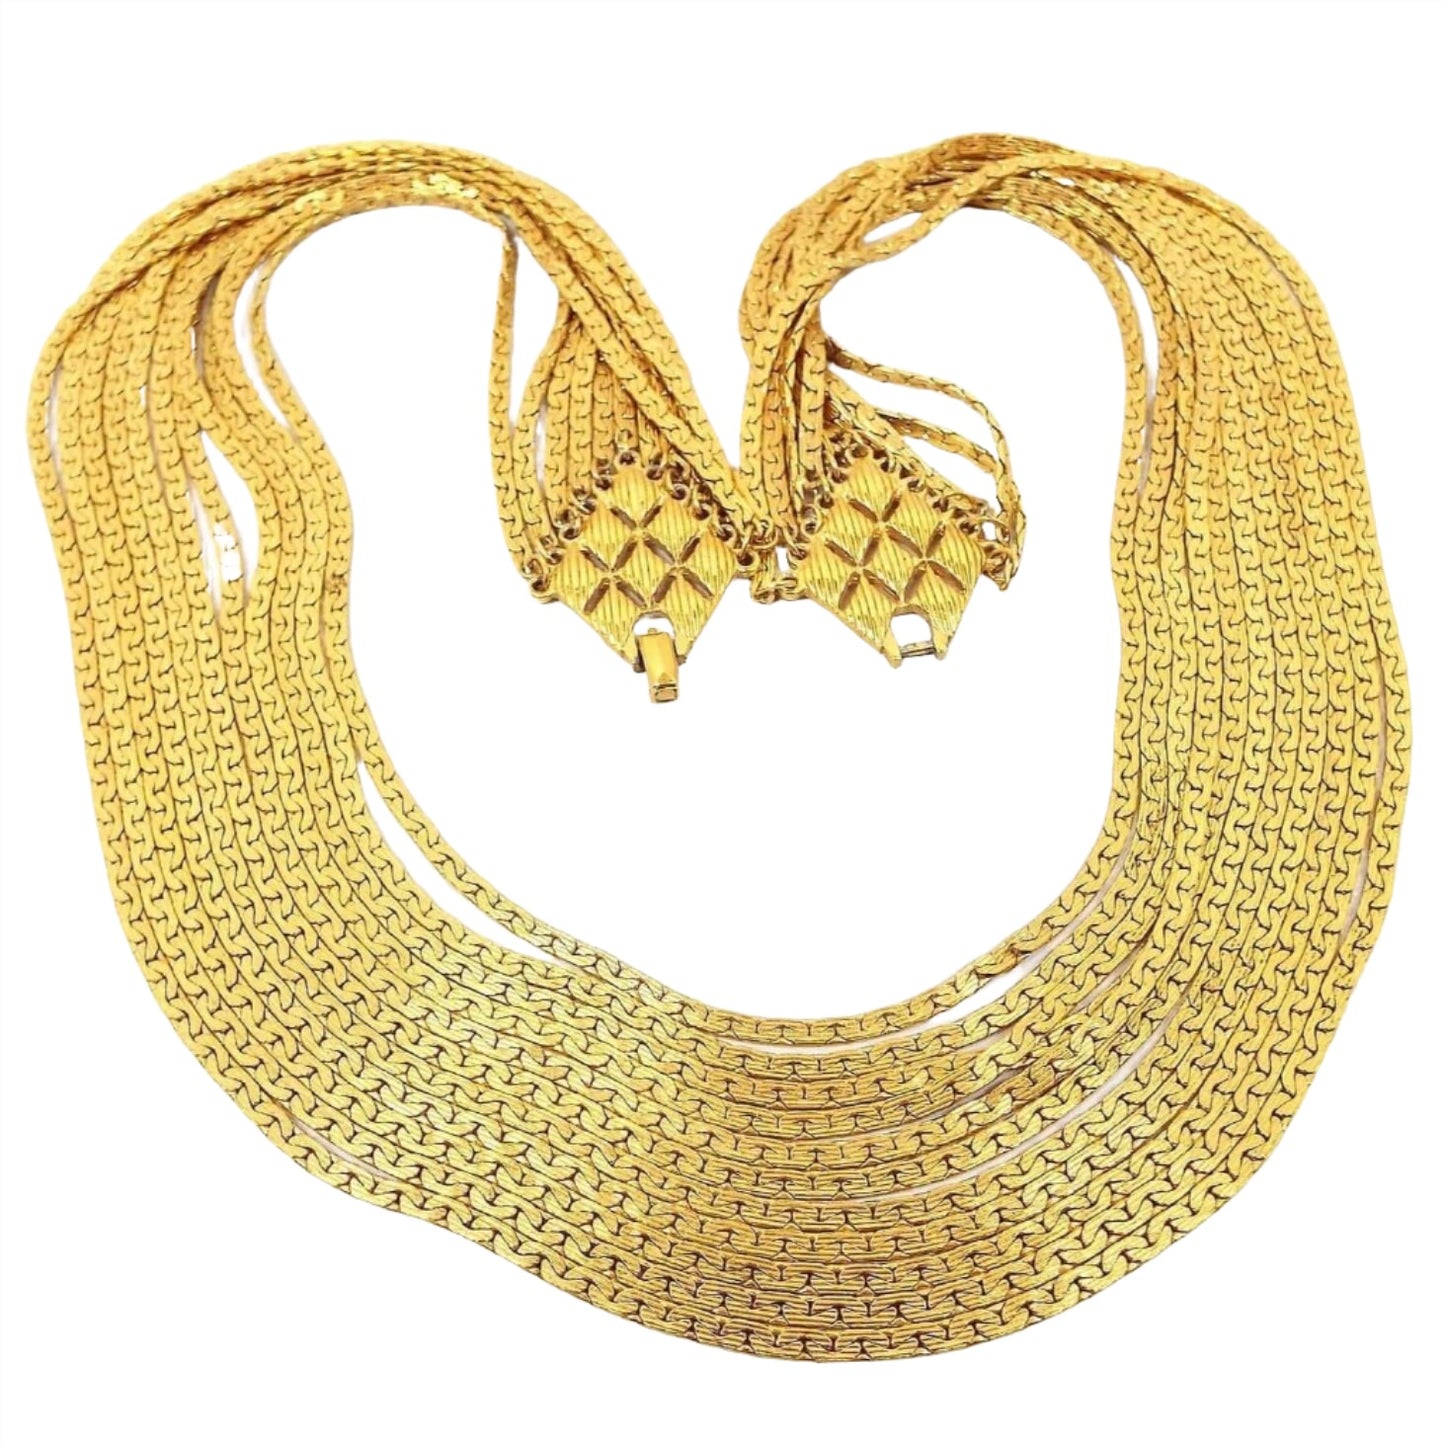 Front view of the Mid Century vintage D'Orlan multi strand chain necklace. There are 11 strands of C link chain in graduating lengths. The chain is flat and has 2 rows of interlocking curve links on each side of the chain. The ends of the necklace attach with small jump rings to an area that has a large diamond pattern. The diamond pattern has 8 smaller diamond shapes inside it that is textured with lines. At the end of each diamond pattern is part of the snap lock clasp. 